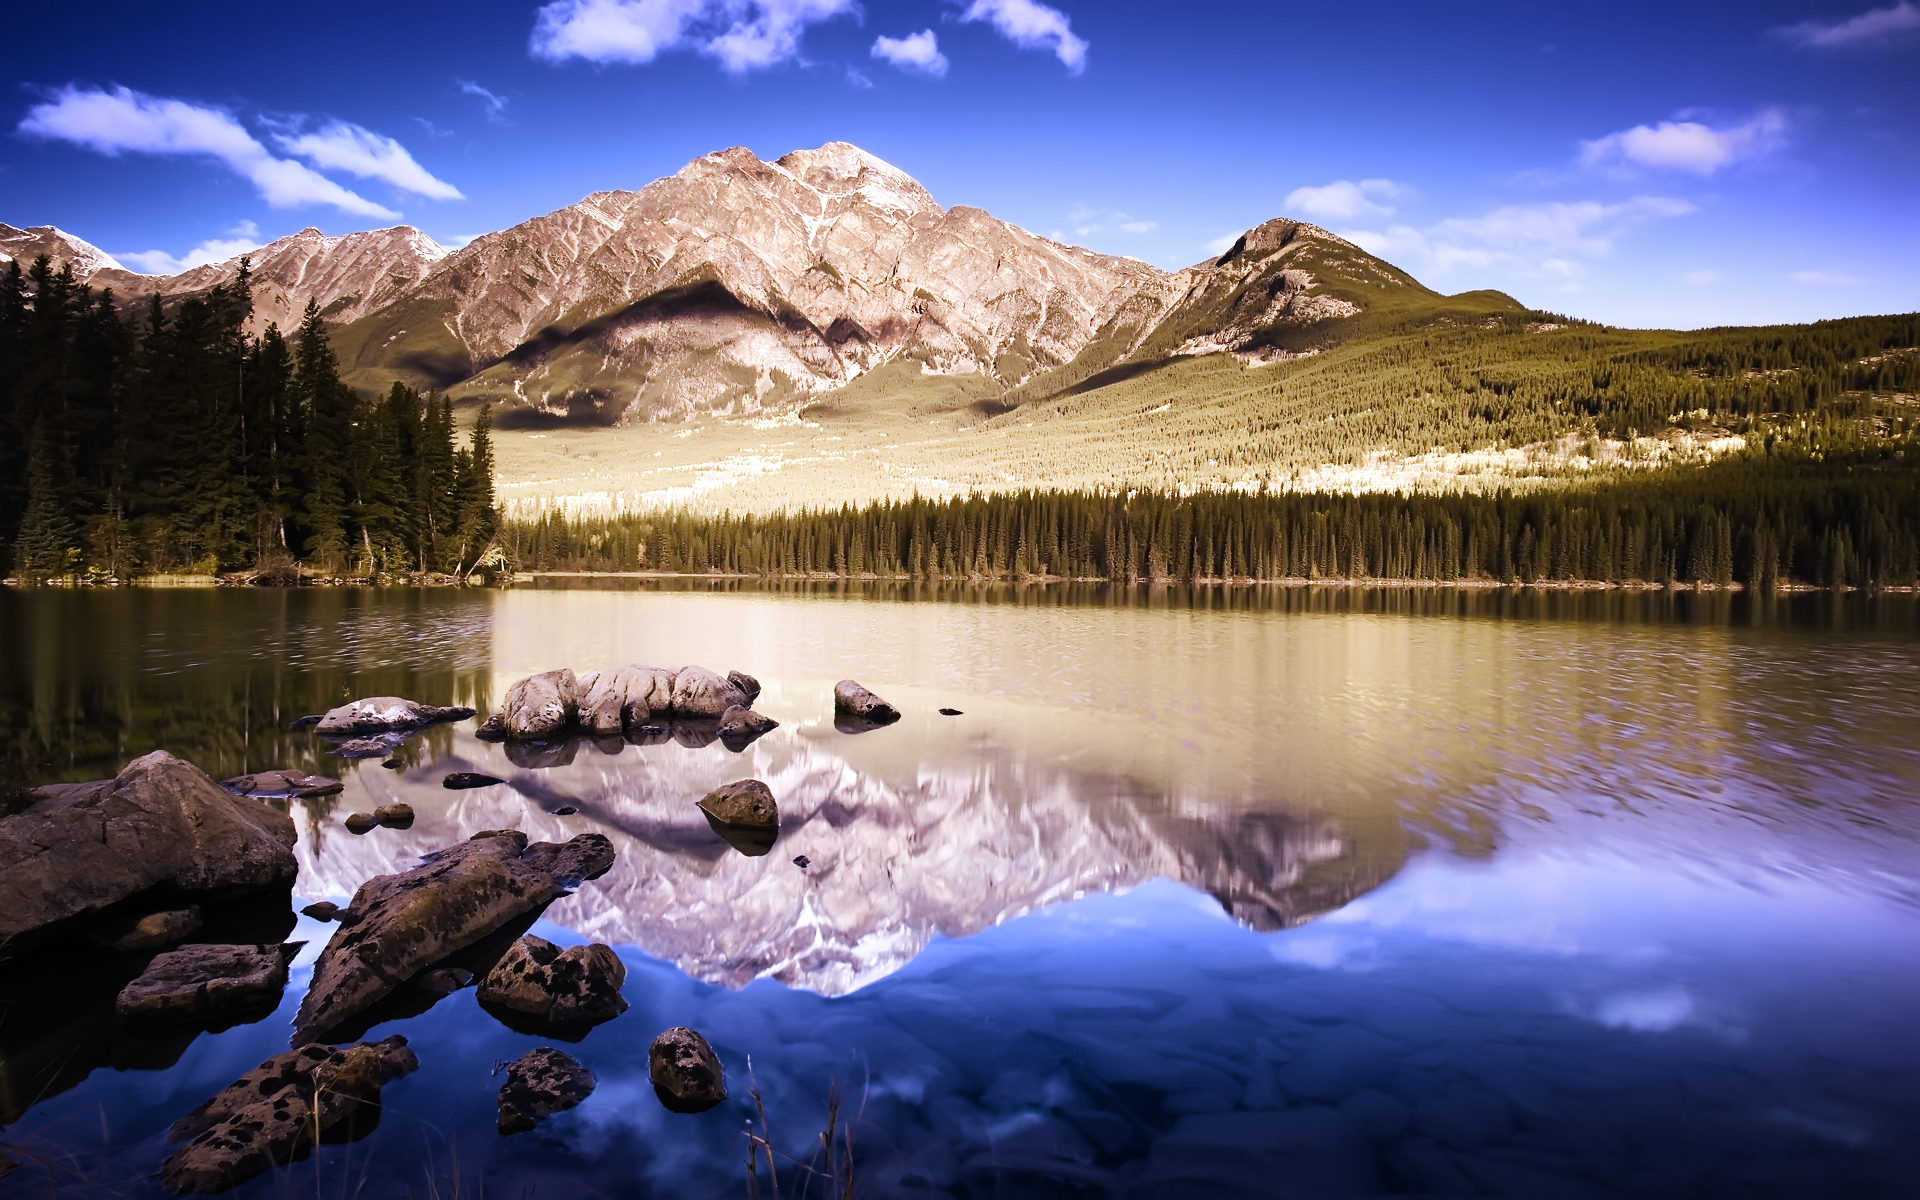 reflective wallpaper,natural landscape,nature,reflection,body of water,mountain